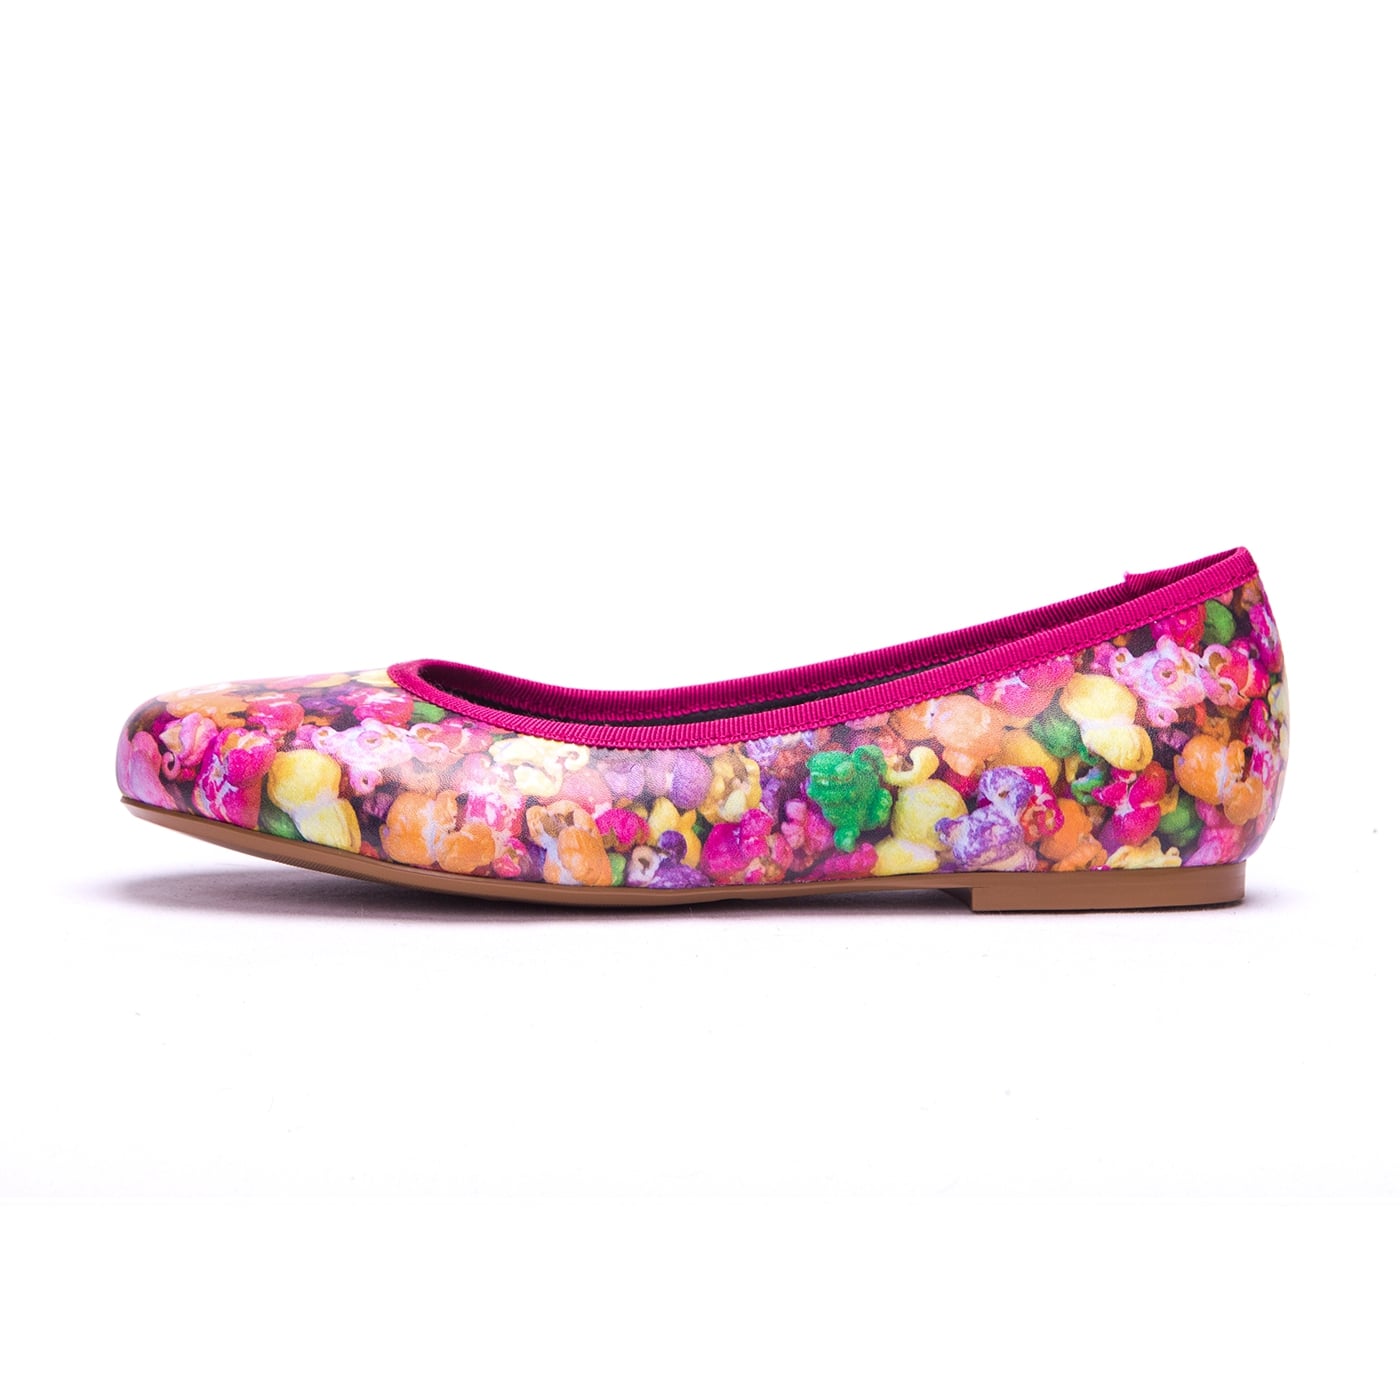 Rainbow Popcorn Ballet Flats by RainbowsAndFairies.com (Popcorn - Colourful - Lollies - Quirky Shoes - Slip Ons - Comfy Flats) - SKU: FW_BALET_PCORN_ORG - Pic 03